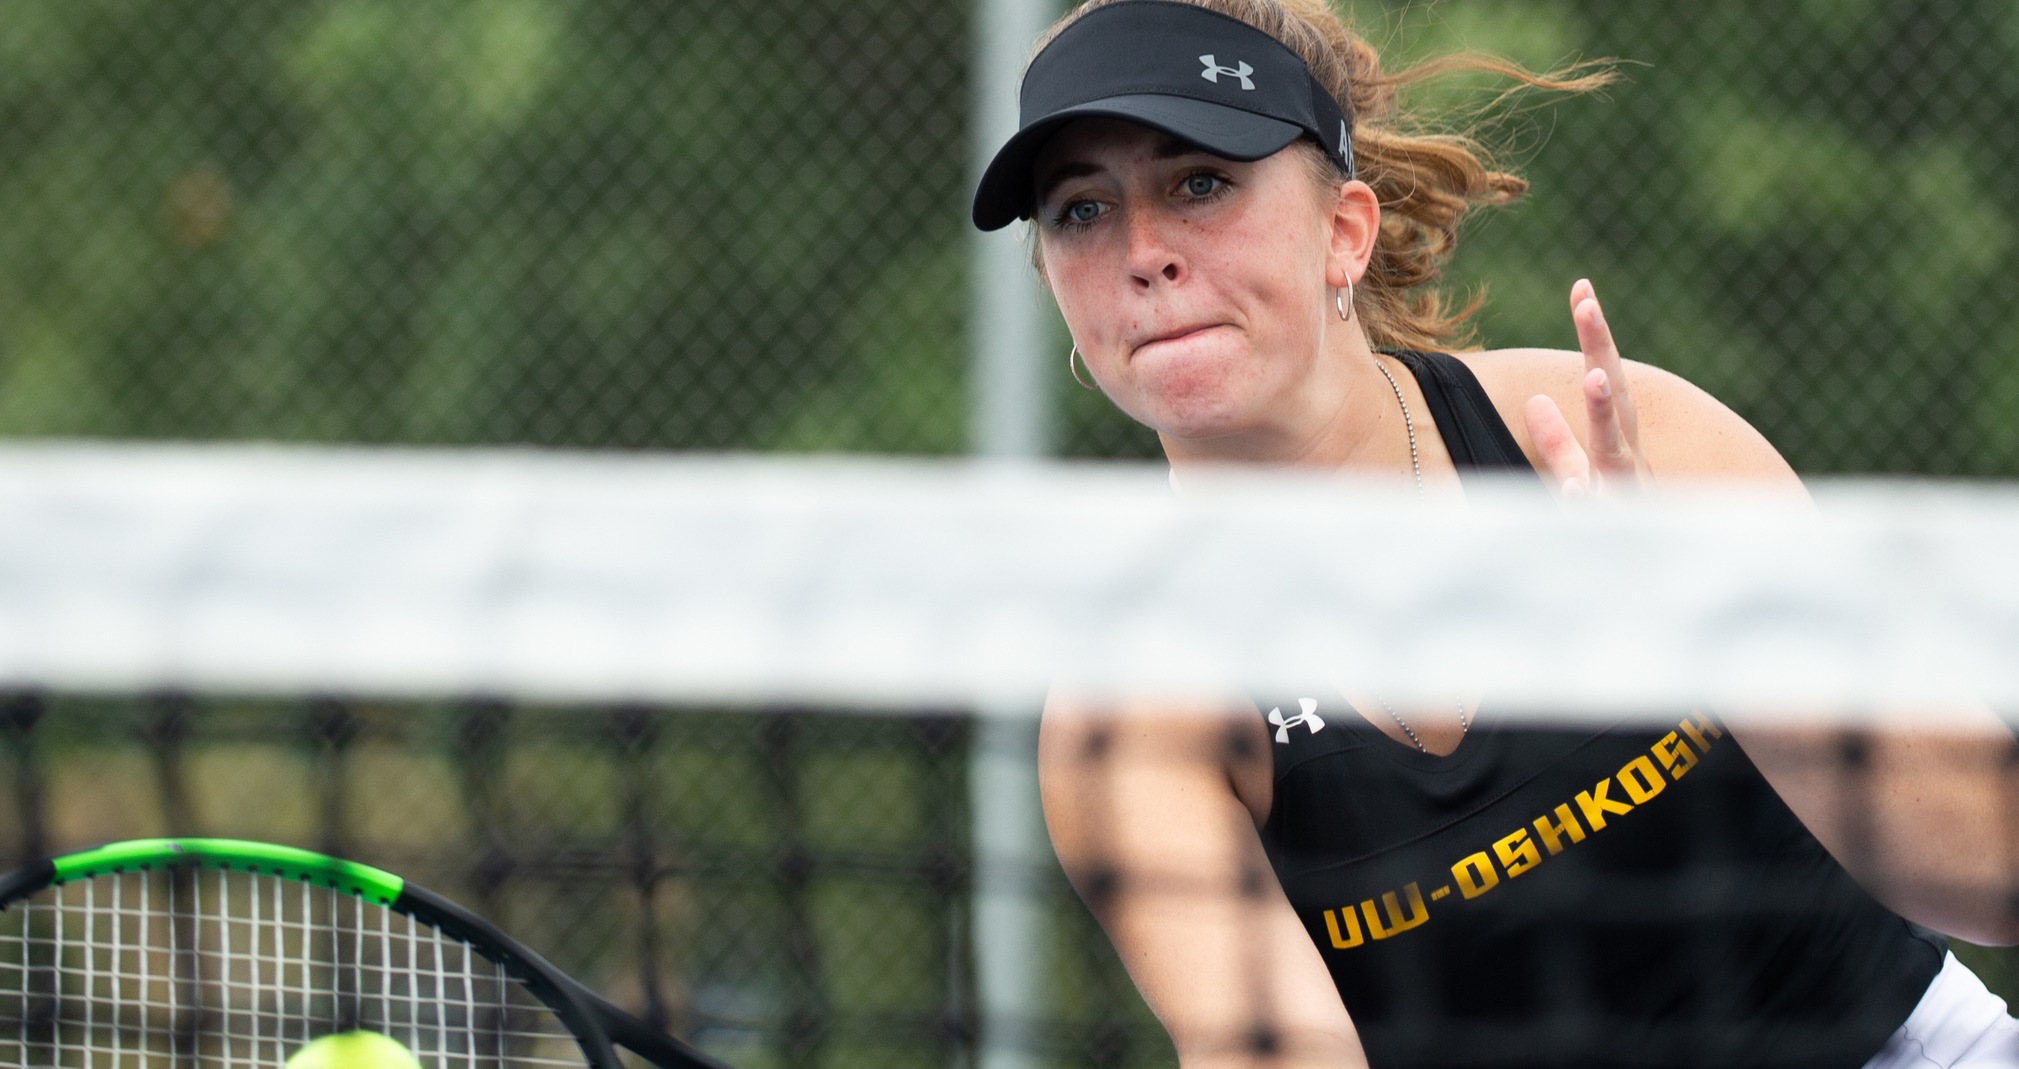 Monica Micoliczyk led the Titans by winning eight games in singles play.